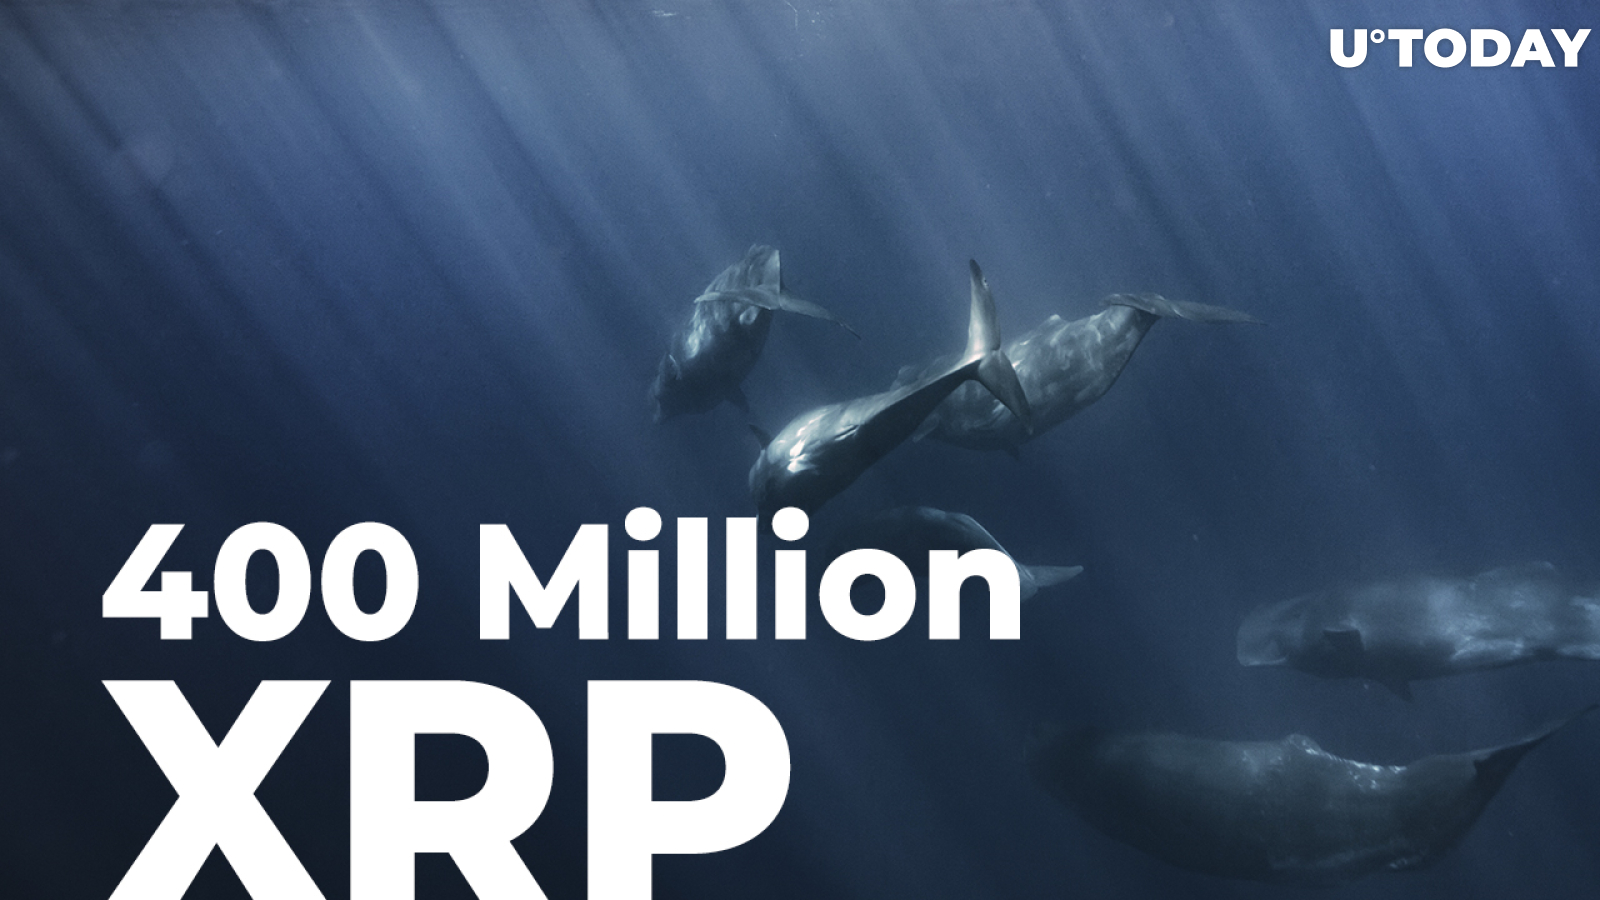 400 Million XRP Sent by Ripple, Anon Whales and ODL Platforms